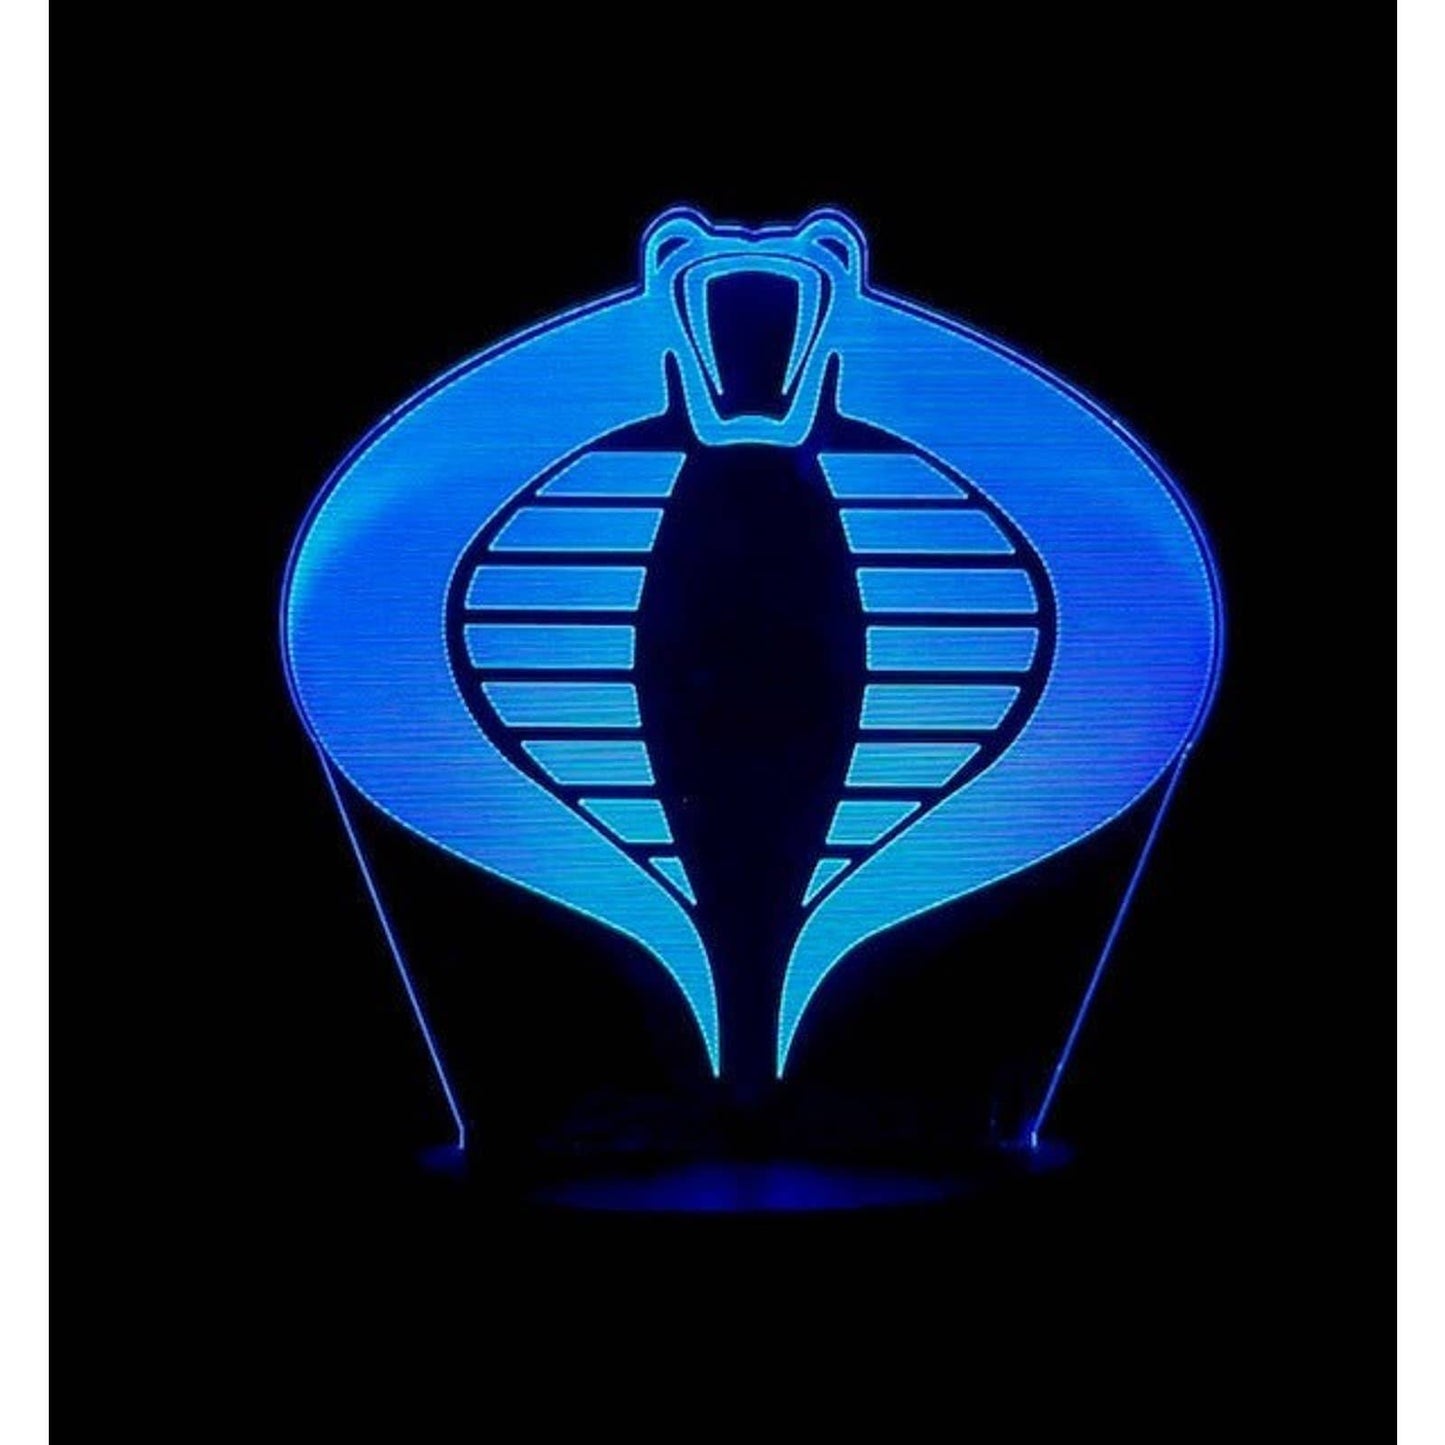 Cobra 3D LED Night-Light 7 Color Changing Lamp w/ Touch Switch